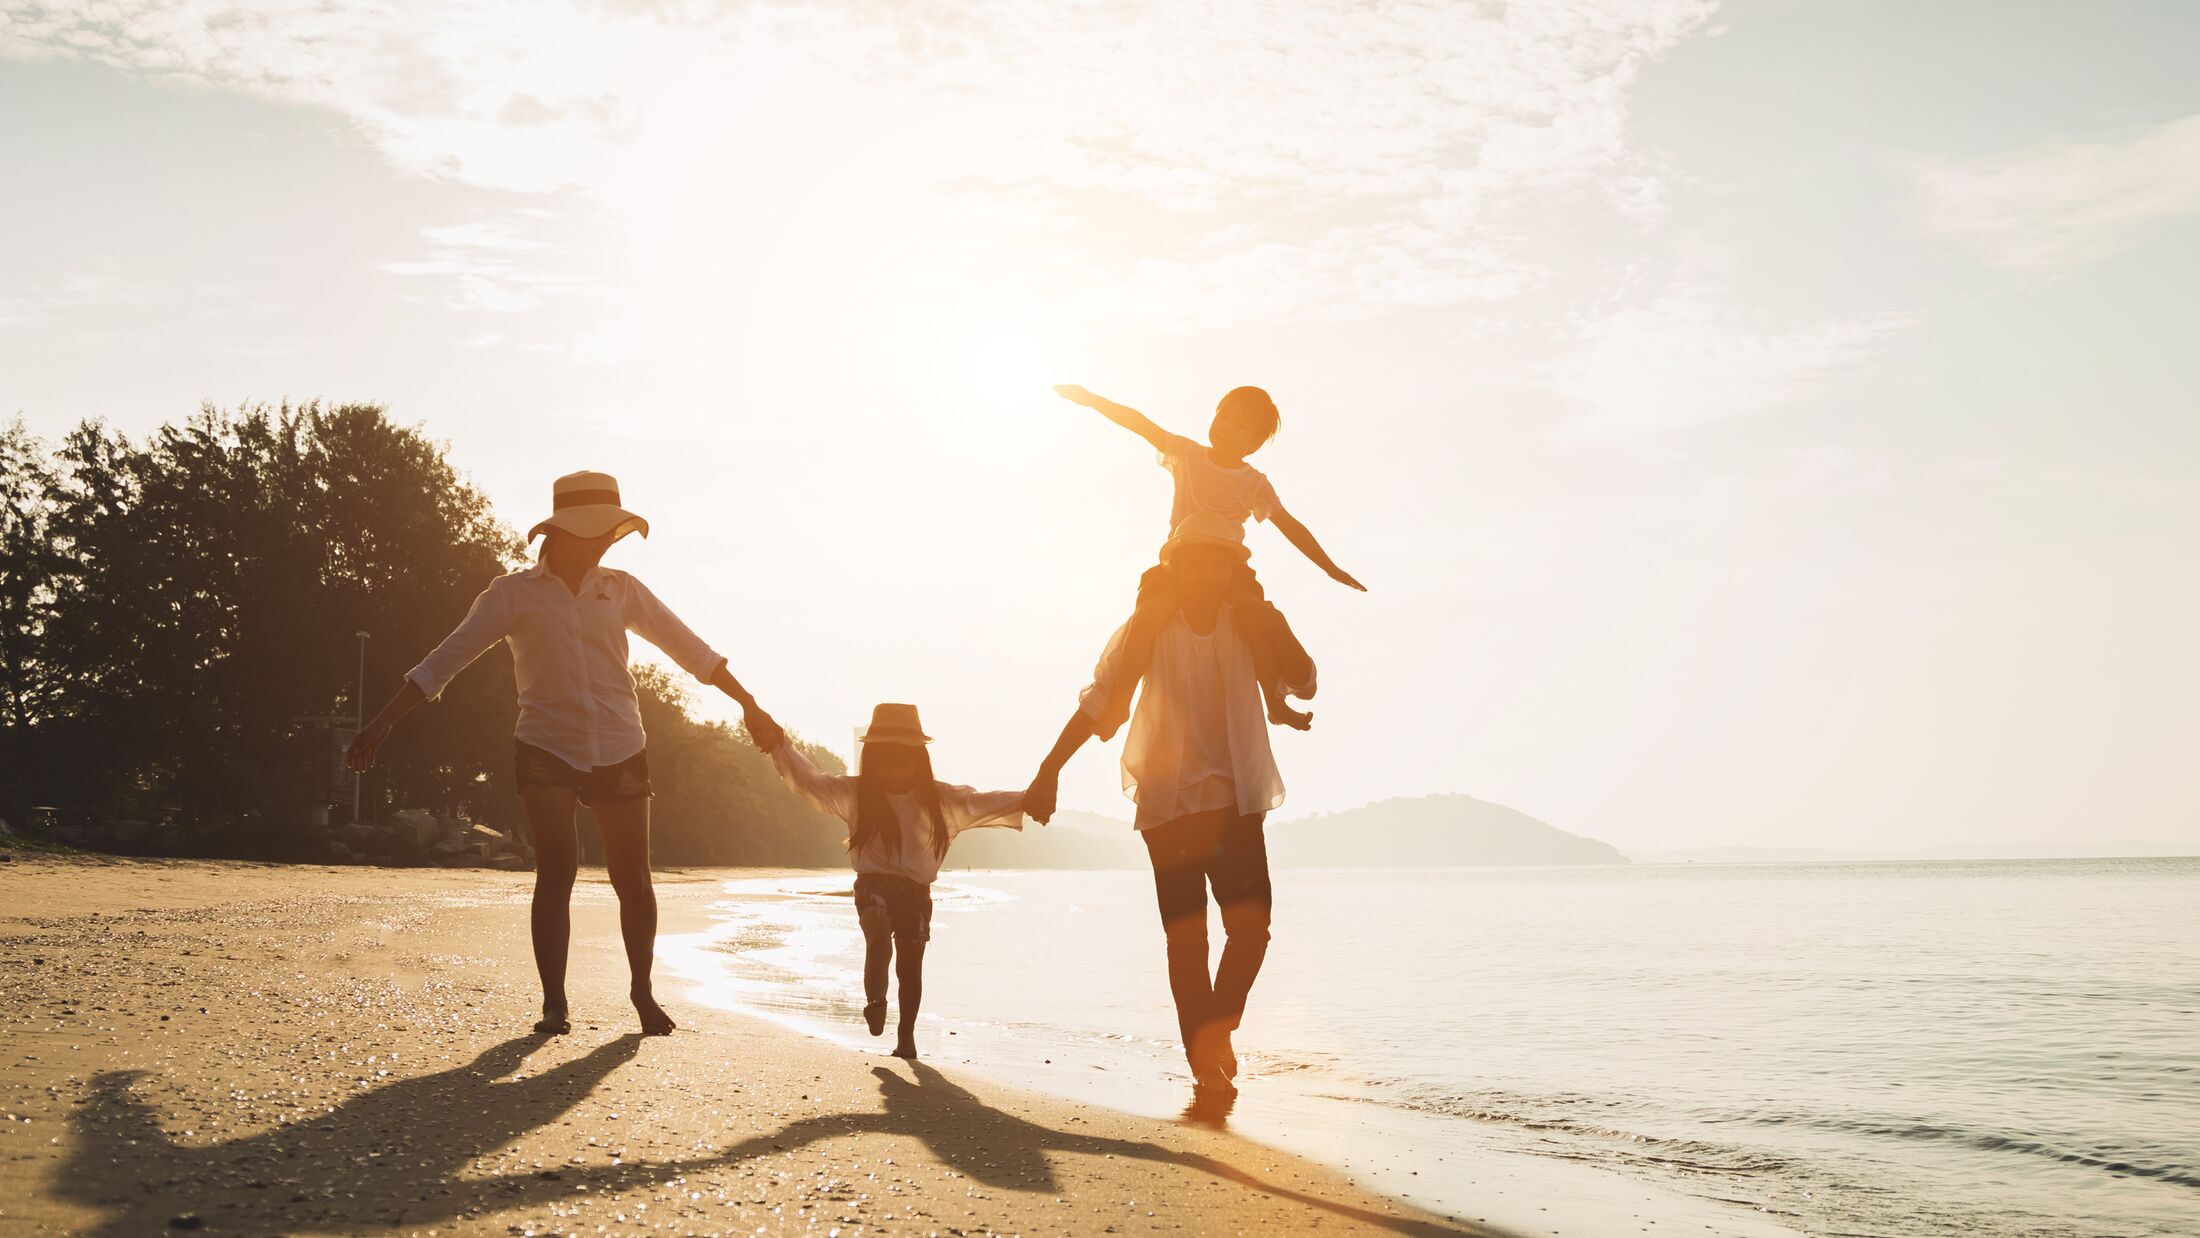 Happy family travel on beach in holiday,Summer vacations. Happy family are having fun on a tropical beach in sunset. Father and mother and children playing together outdoor on beach.